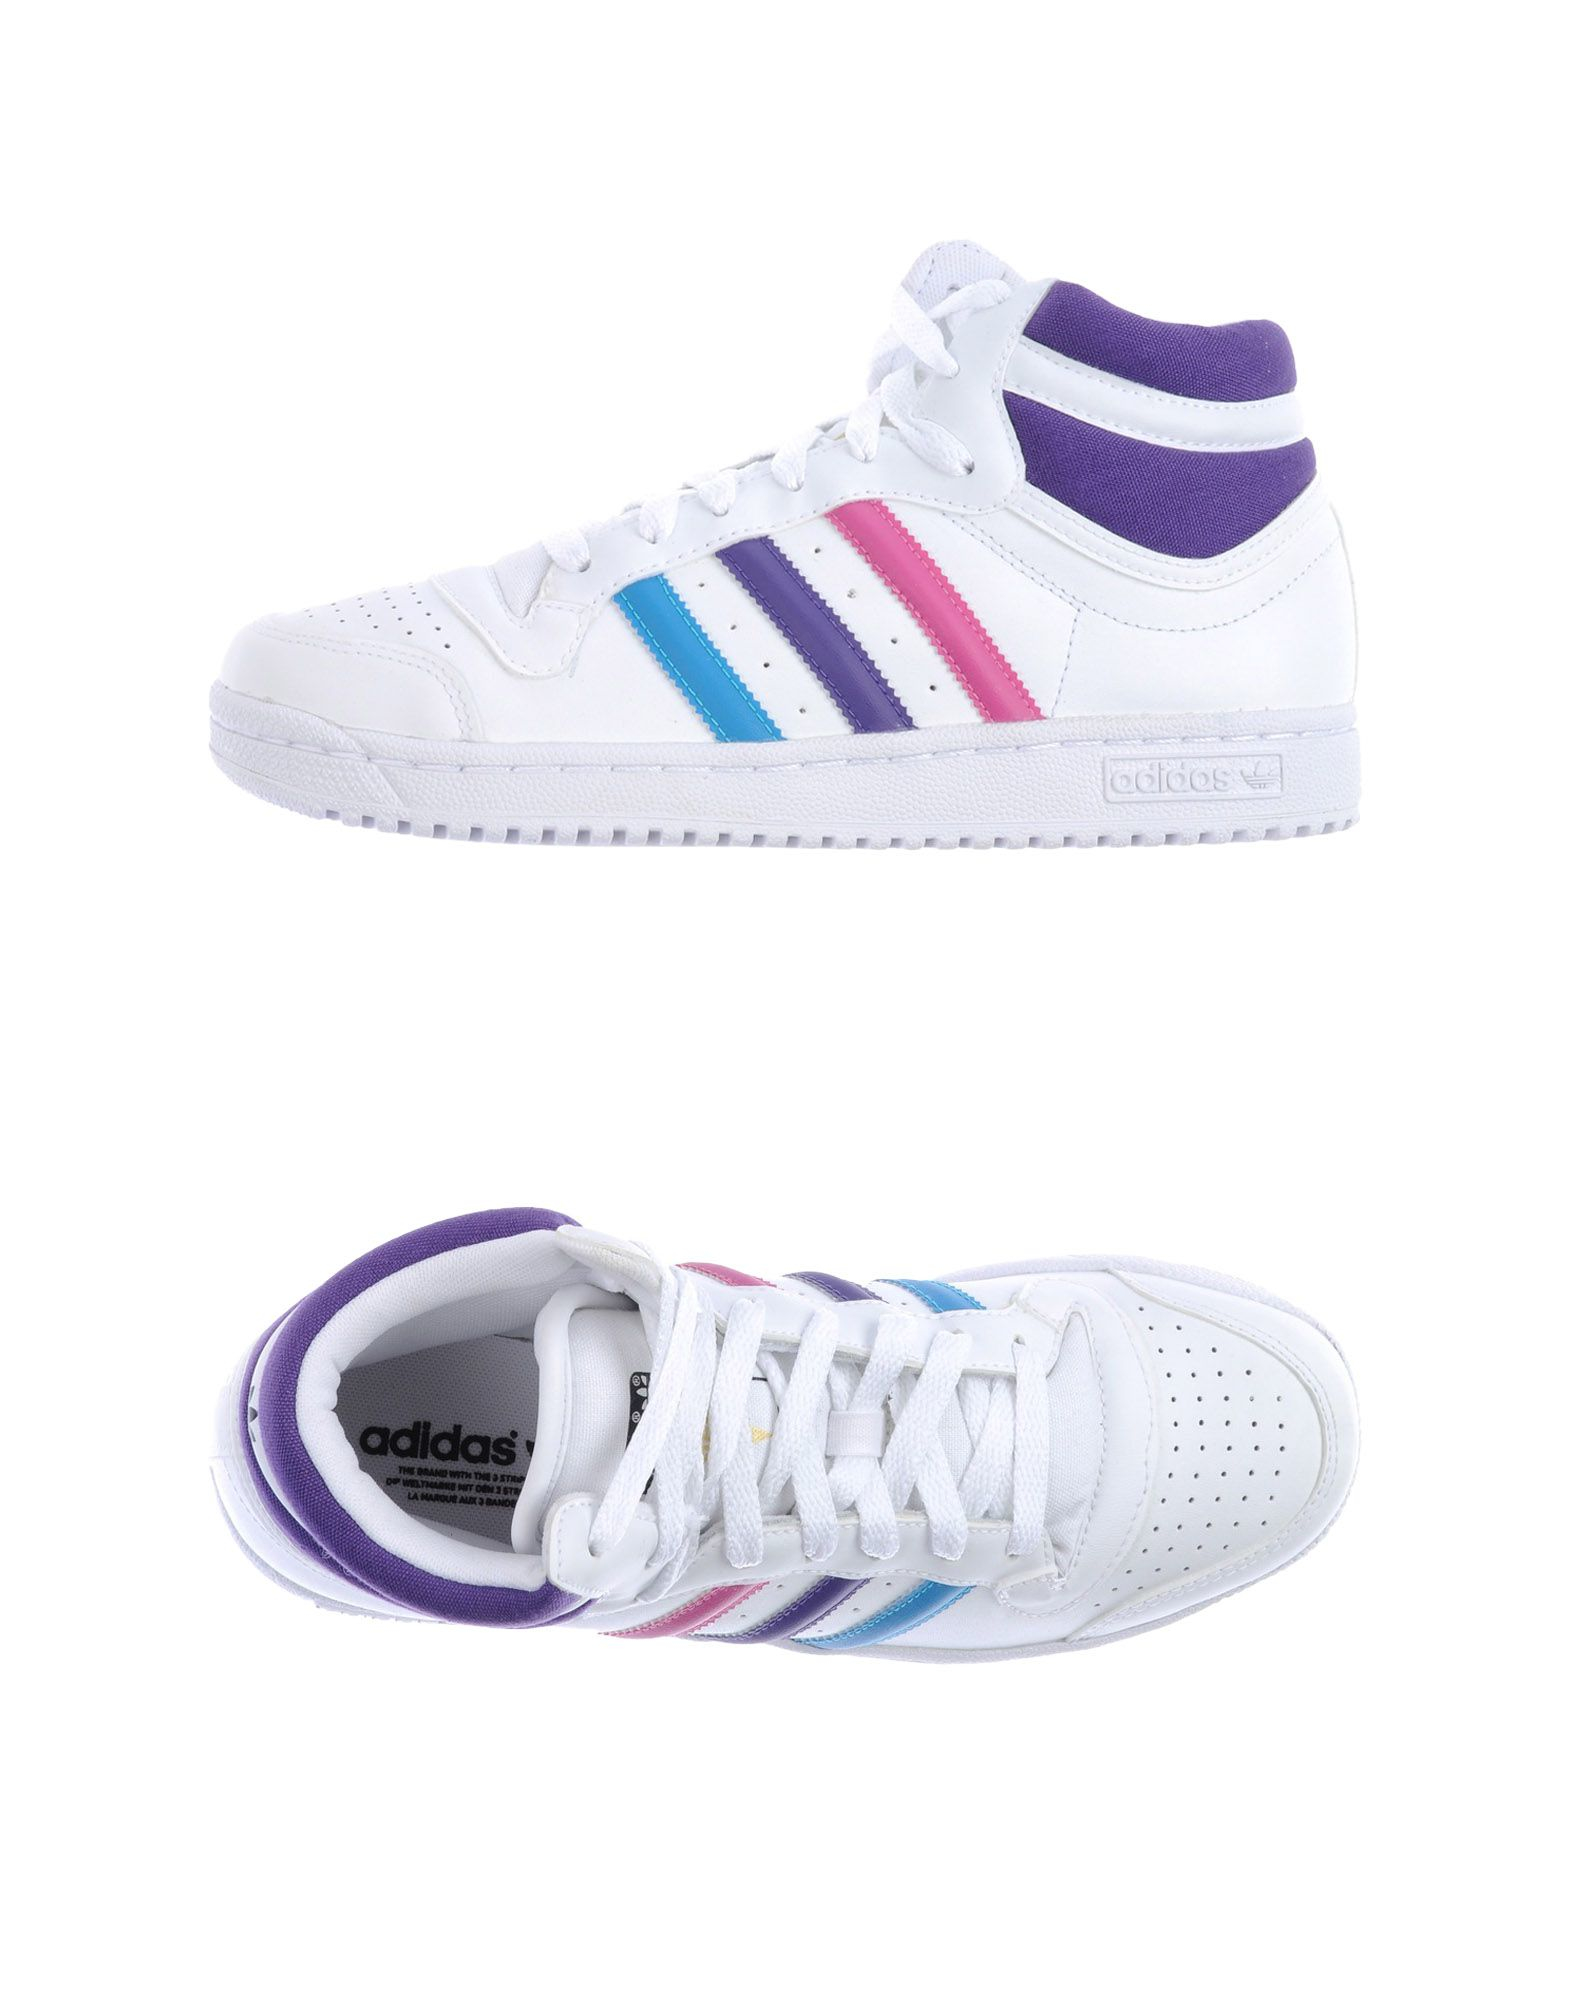 Lyst - Adidas originals High-tops & Trainers in White